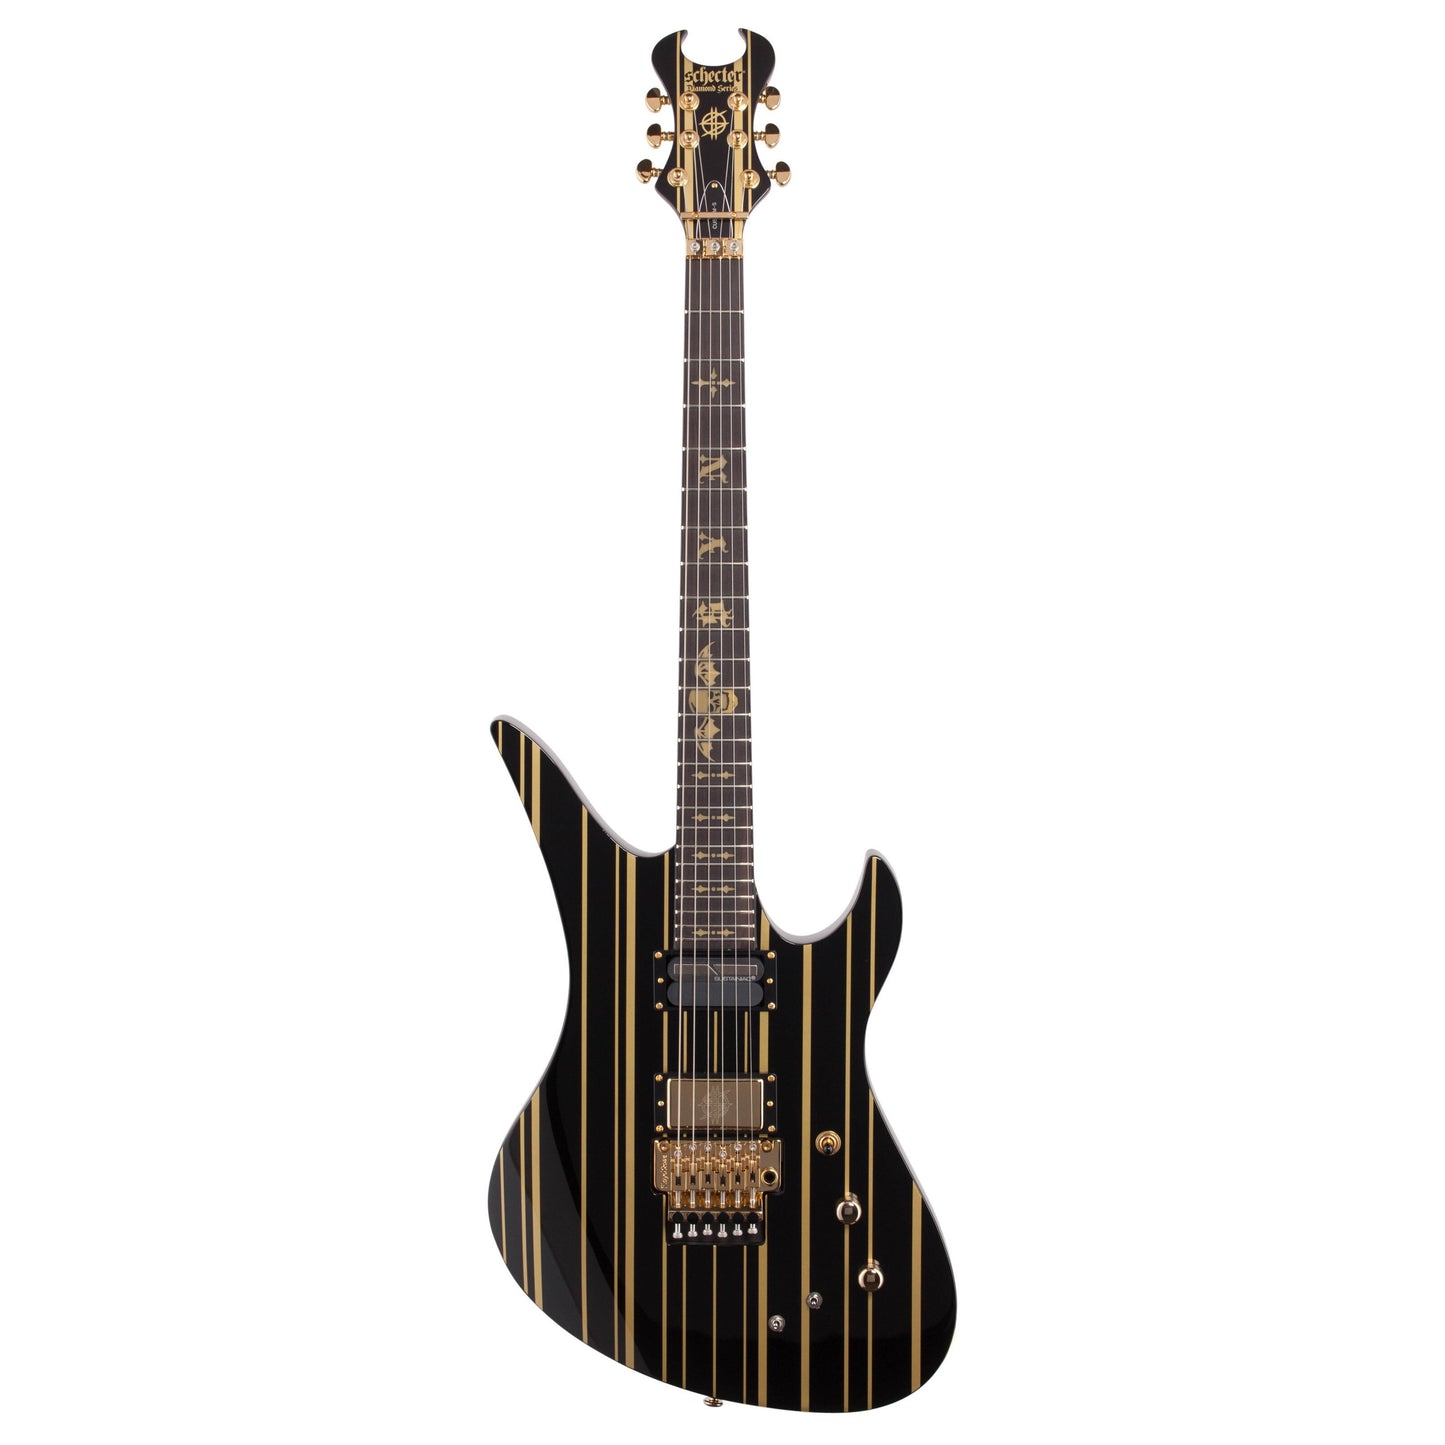 Schecter Synyster Custom S Electric Guitar, Black Gold Stripes